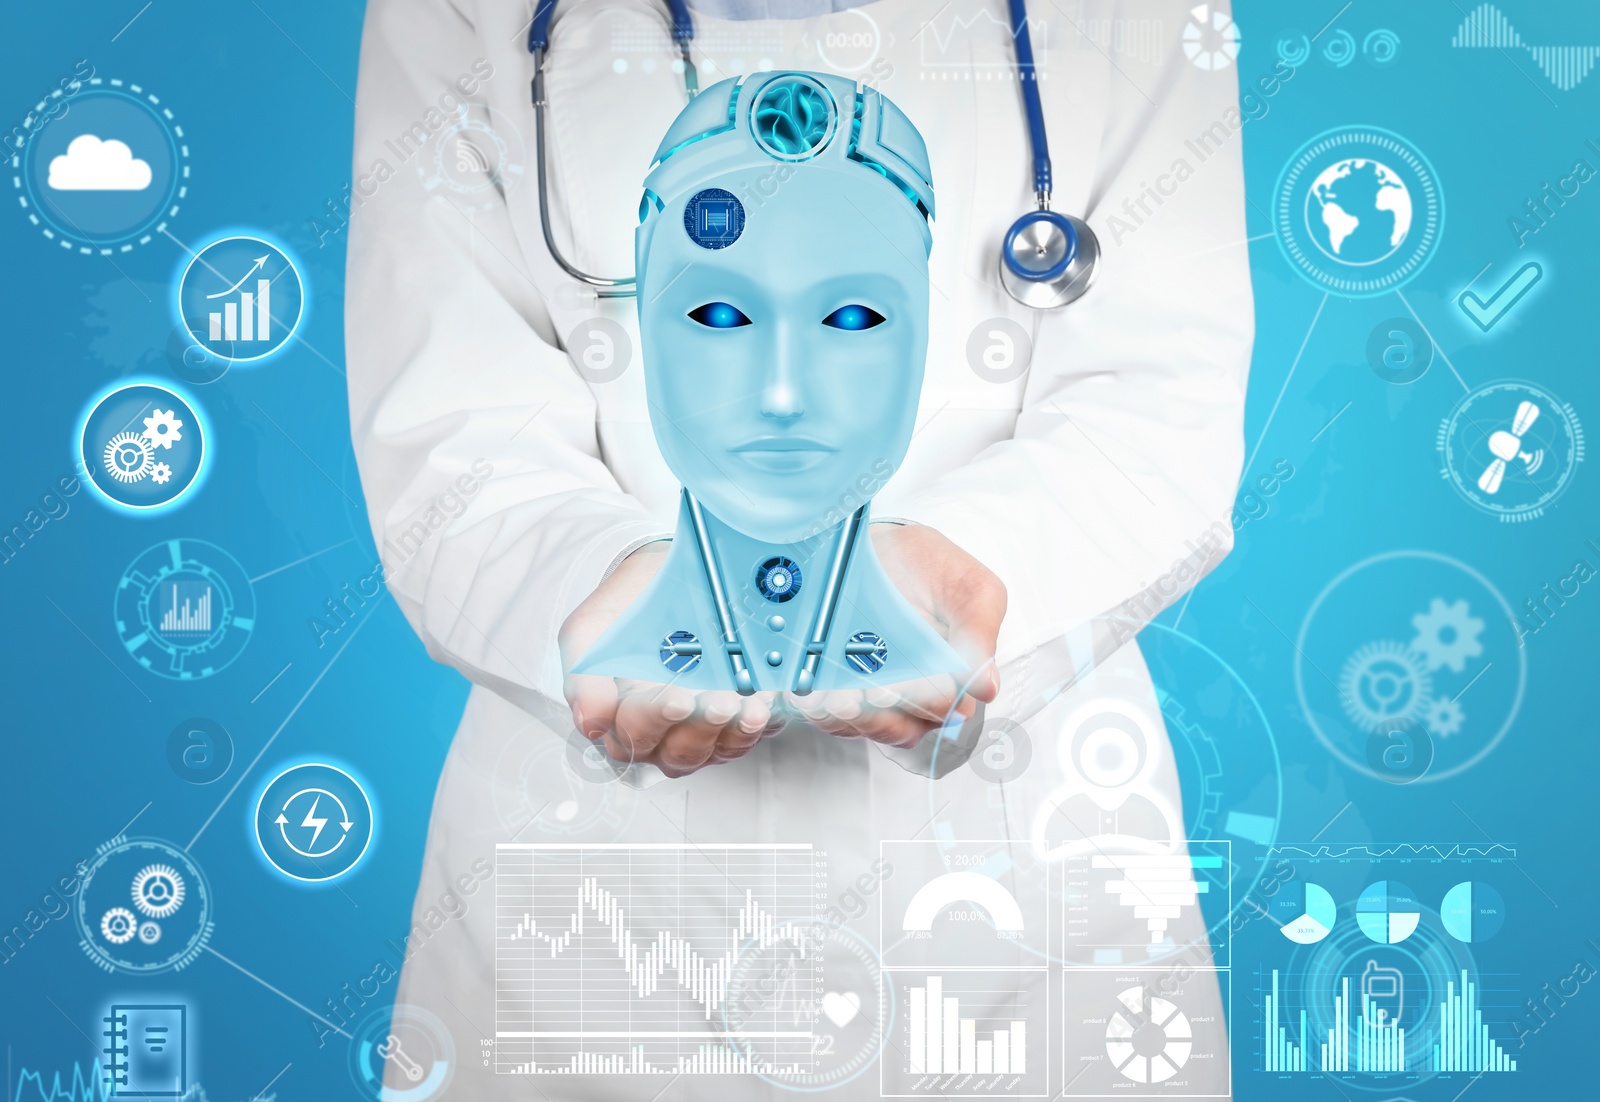 Image of Doctor demonstrating digital model of artificial intelligence on blue background, closeup. Machine learning concept